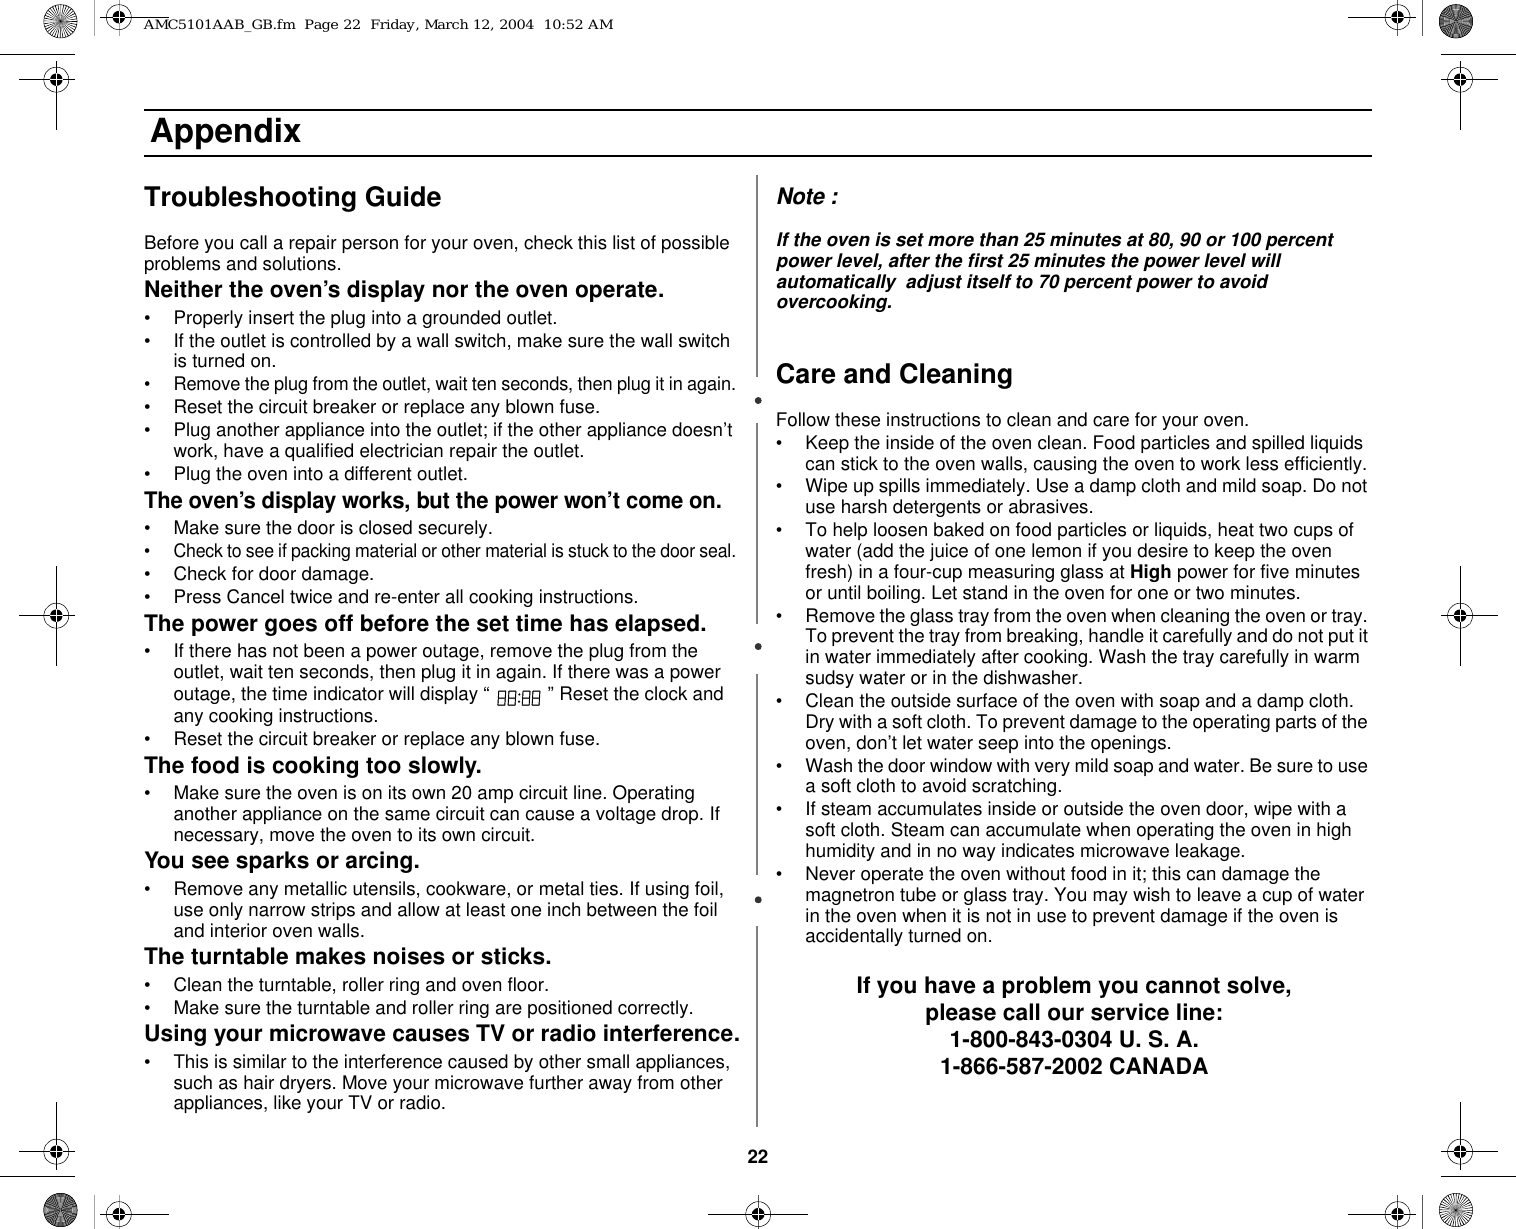 22 AppendixTroubleshooting GuideBefore you call a repair person for your oven, check this list of possible problems and solutions.Neither the oven’s display nor the oven operate.• Properly insert the plug into a grounded outlet. • If the outlet is controlled by a wall switch, make sure the wall switch is turned on. • Remove the plug from the outlet, wait ten seconds, then plug it in again. • Reset the circuit breaker or replace any blown fuse.• Plug another appliance into the outlet; if the other appliance doesn’t work, have a qualified electrician repair the outlet. • Plug the oven into a different outlet.The oven’s display works, but the power won’t come on.• Make sure the door is closed securely.• Check to see if packing material or other material is stuck to the door seal. • Check for door damage.• Press Cancel twice and re-enter all cooking instructions.The power goes off before the set time has elapsed.• If there has not been a power outage, remove the plug from the outlet, wait ten seconds, then plug it in again. If there was a power outage, the time indicator will display “   ” Reset the clock and any cooking instructions. • Reset the circuit breaker or replace any blown fuse. The food is cooking too slowly.• Make sure the oven is on its own 20 amp circuit line. Operating another appliance on the same circuit can cause a voltage drop. If necessary, move the oven to its own circuit.You see sparks or arcing.• Remove any metallic utensils, cookware, or metal ties. If using foil, use only narrow strips and allow at least one inch between the foil and interior oven walls.The turntable makes noises or sticks.• Clean the turntable, roller ring and oven floor. • Make sure the turntable and roller ring are positioned correctly.Using your microwave causes TV or radio interference.• This is similar to the interference caused by other small appliances, such as hair dryers. Move your microwave further away from other appliances, like your TV or radio.Note :If the oven is set more than 25 minutes at 80, 90 or 100 percent power level, after the first 25 minutes the power level will automatically  adjust itself to 70 percent power to avoid overcooking.Care and CleaningFollow these instructions to clean and care for your oven.• Keep the inside of the oven clean. Food particles and spilled liquids can stick to the oven walls, causing the oven to work less efficiently.• Wipe up spills immediately. Use a damp cloth and mild soap. Do not use harsh detergents or abrasives. • To help loosen baked on food particles or liquids, heat two cups of water (add the juice of one lemon if you desire to keep the oven fresh) in a four-cup measuring glass at High power for five minutes or until boiling. Let stand in the oven for one or two minutes. • Remove the glass tray from the oven when cleaning the oven or tray. To prevent the tray from breaking, handle it carefully and do not put it in water immediately after cooking. Wash the tray carefully in warm sudsy water or in the dishwasher. • Clean the outside surface of the oven with soap and a damp cloth. Dry with a soft cloth. To prevent damage to the operating parts of the oven, don’t let water seep into the openings.• Wash the door window with very mild soap and water. Be sure to use a soft cloth to avoid scratching.• If steam accumulates inside or outside the oven door, wipe with a soft cloth. Steam can accumulate when operating the oven in high humidity and in no way indicates microwave leakage.• Never operate the oven without food in it; this can damage the magnetron tube or glass tray. You may wish to leave a cup of water in the oven when it is not in use to prevent damage if the oven is accidentally turned on.If you have a problem you cannot solve,please call our service line:1-800-843-0304 U. S. A.1-866-587-2002 CANADAAMC5101AAB_GB.fm  Page 22  Friday, March 12, 2004  10:52 AM